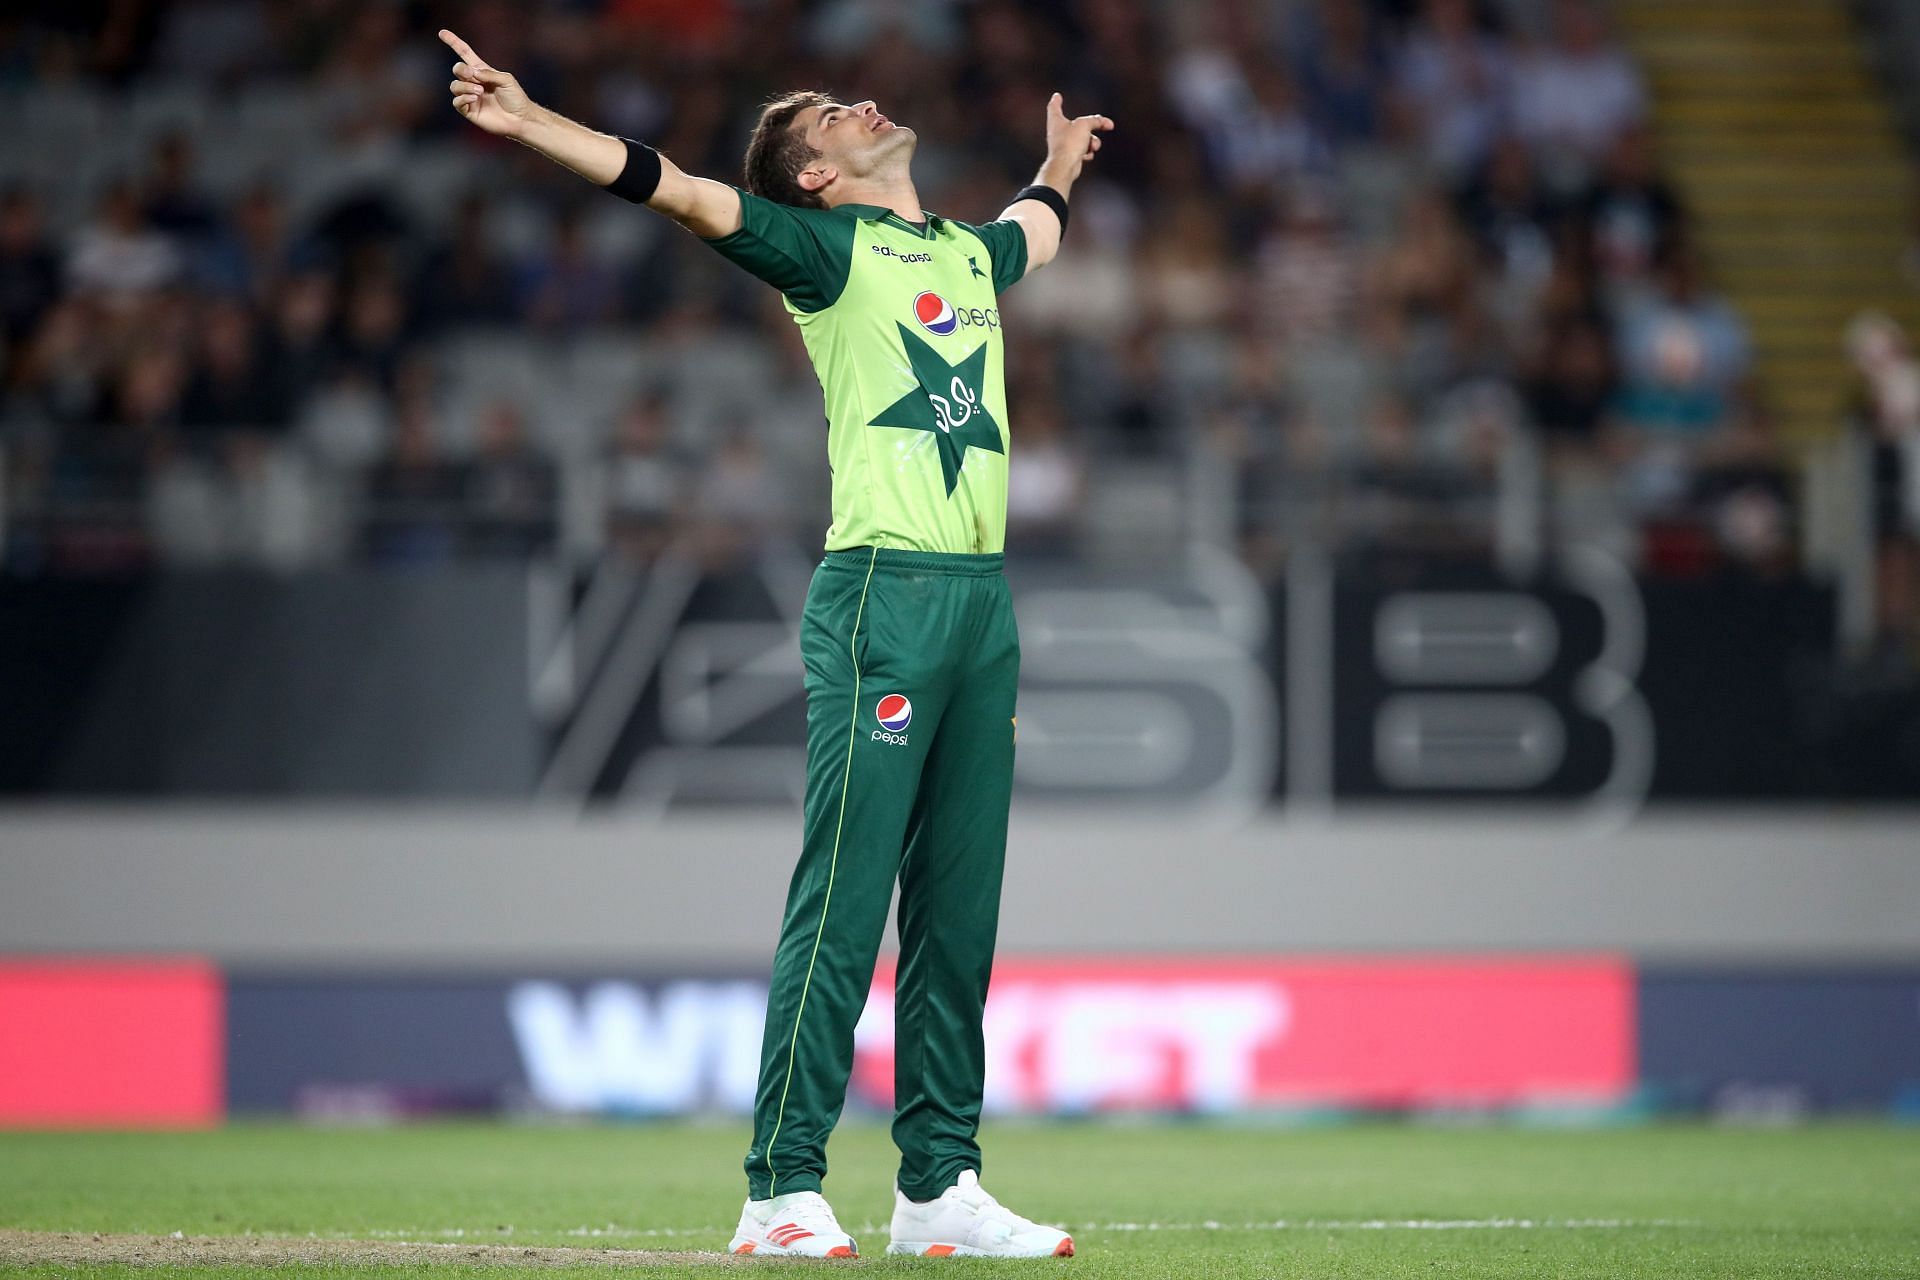 Shaheen Shah Afridi has been the most successful bowler for the Lahore Qalandars in the history of the Pakistan Super League